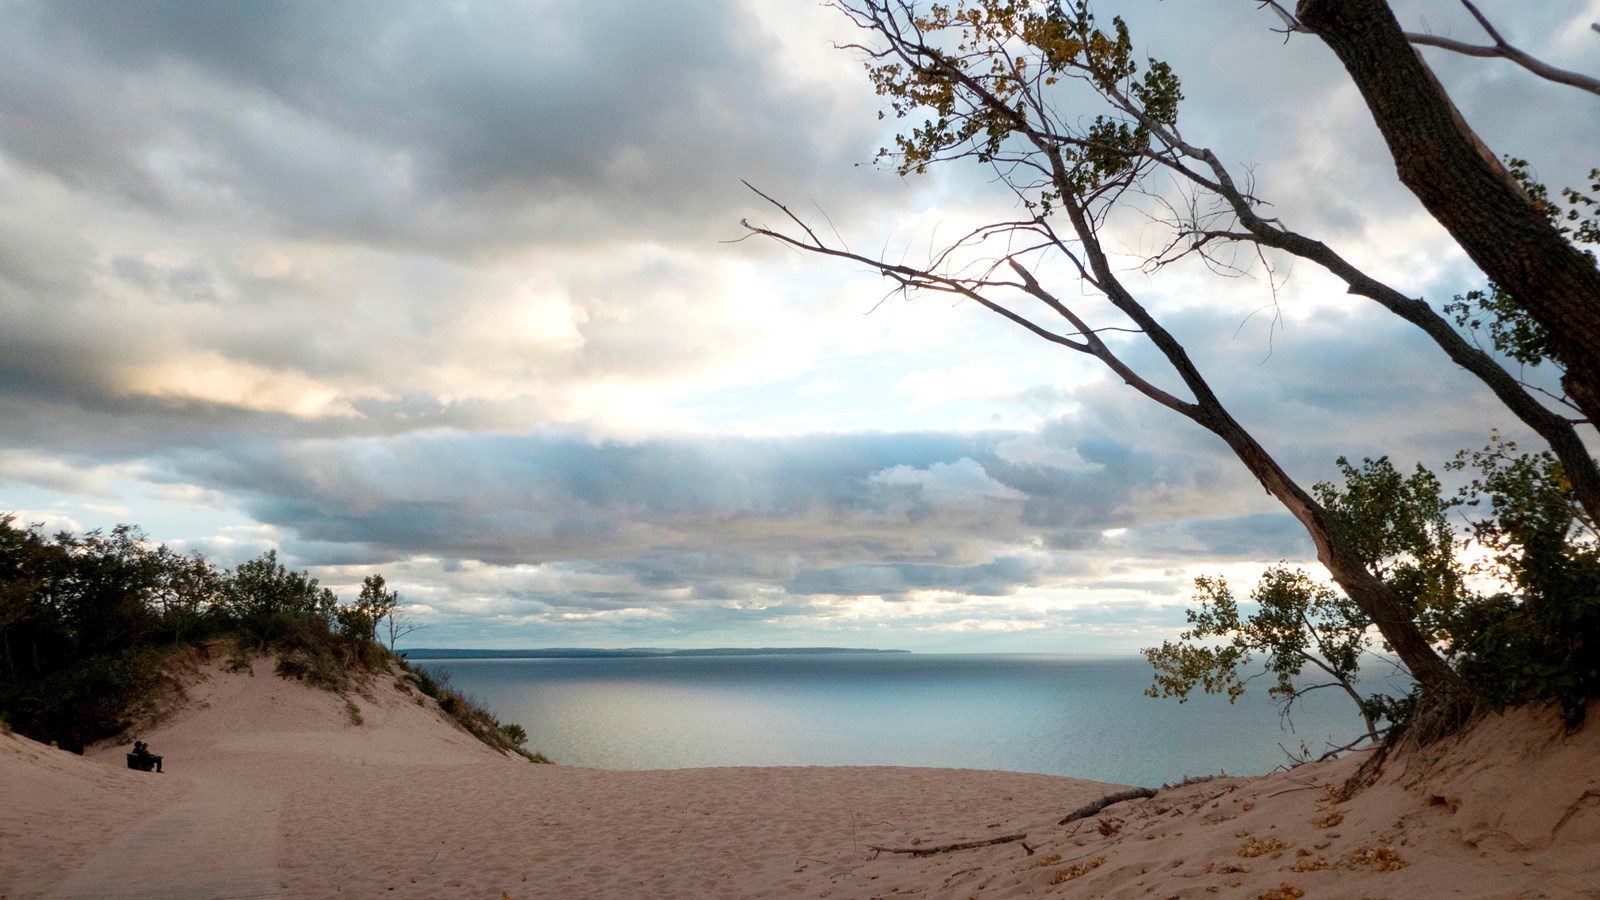 Cloudy, gray sky darkens the sand and tree in the foreground and reflect in the water at the horizon